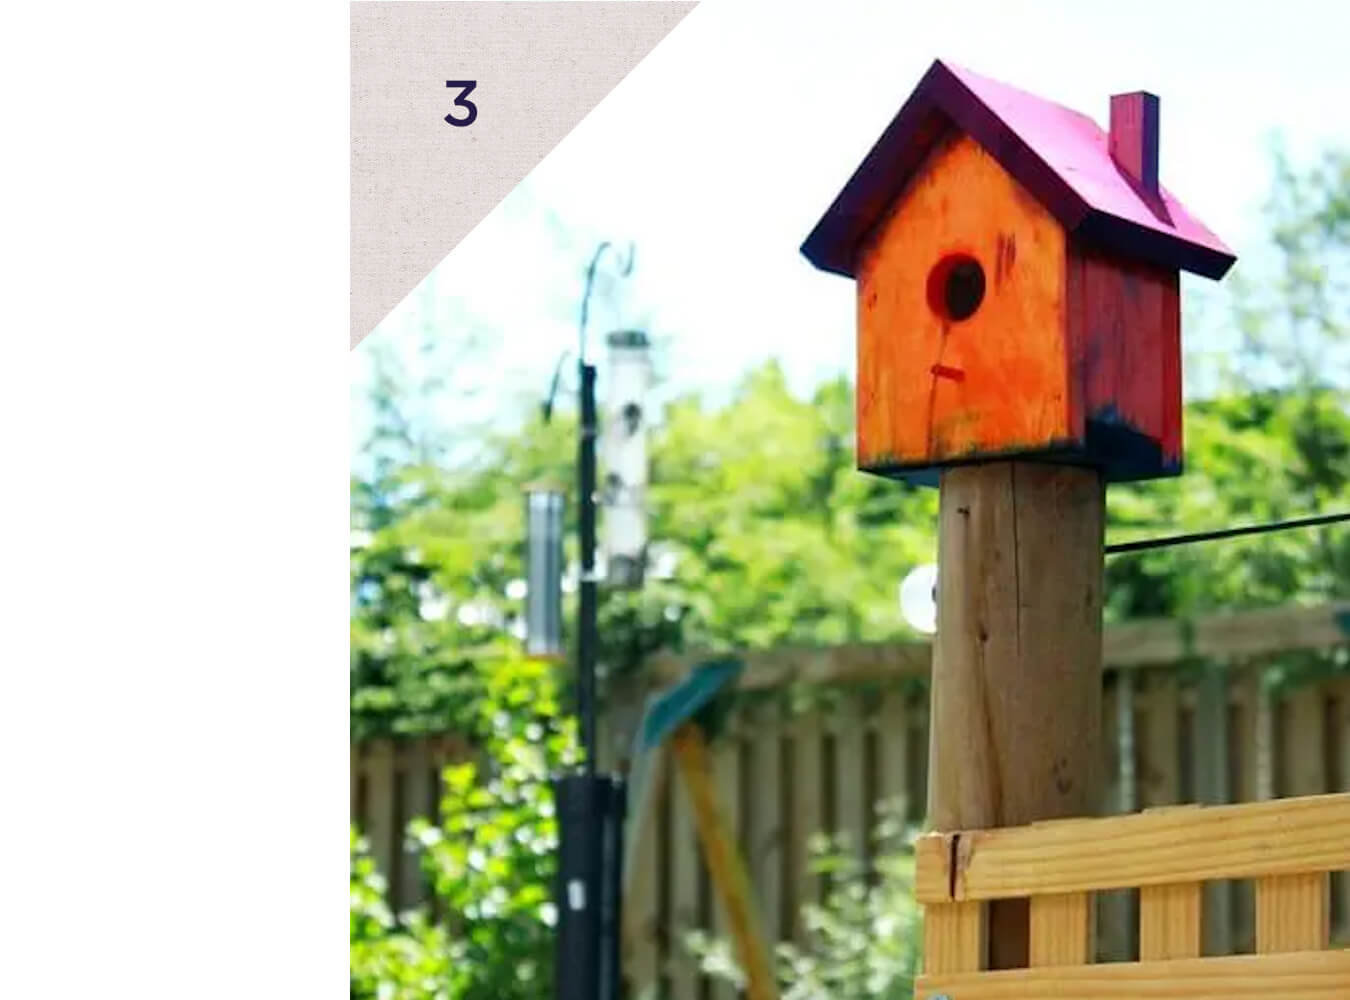 Let the kids have a go - Birdhouse painting with Artful Parent